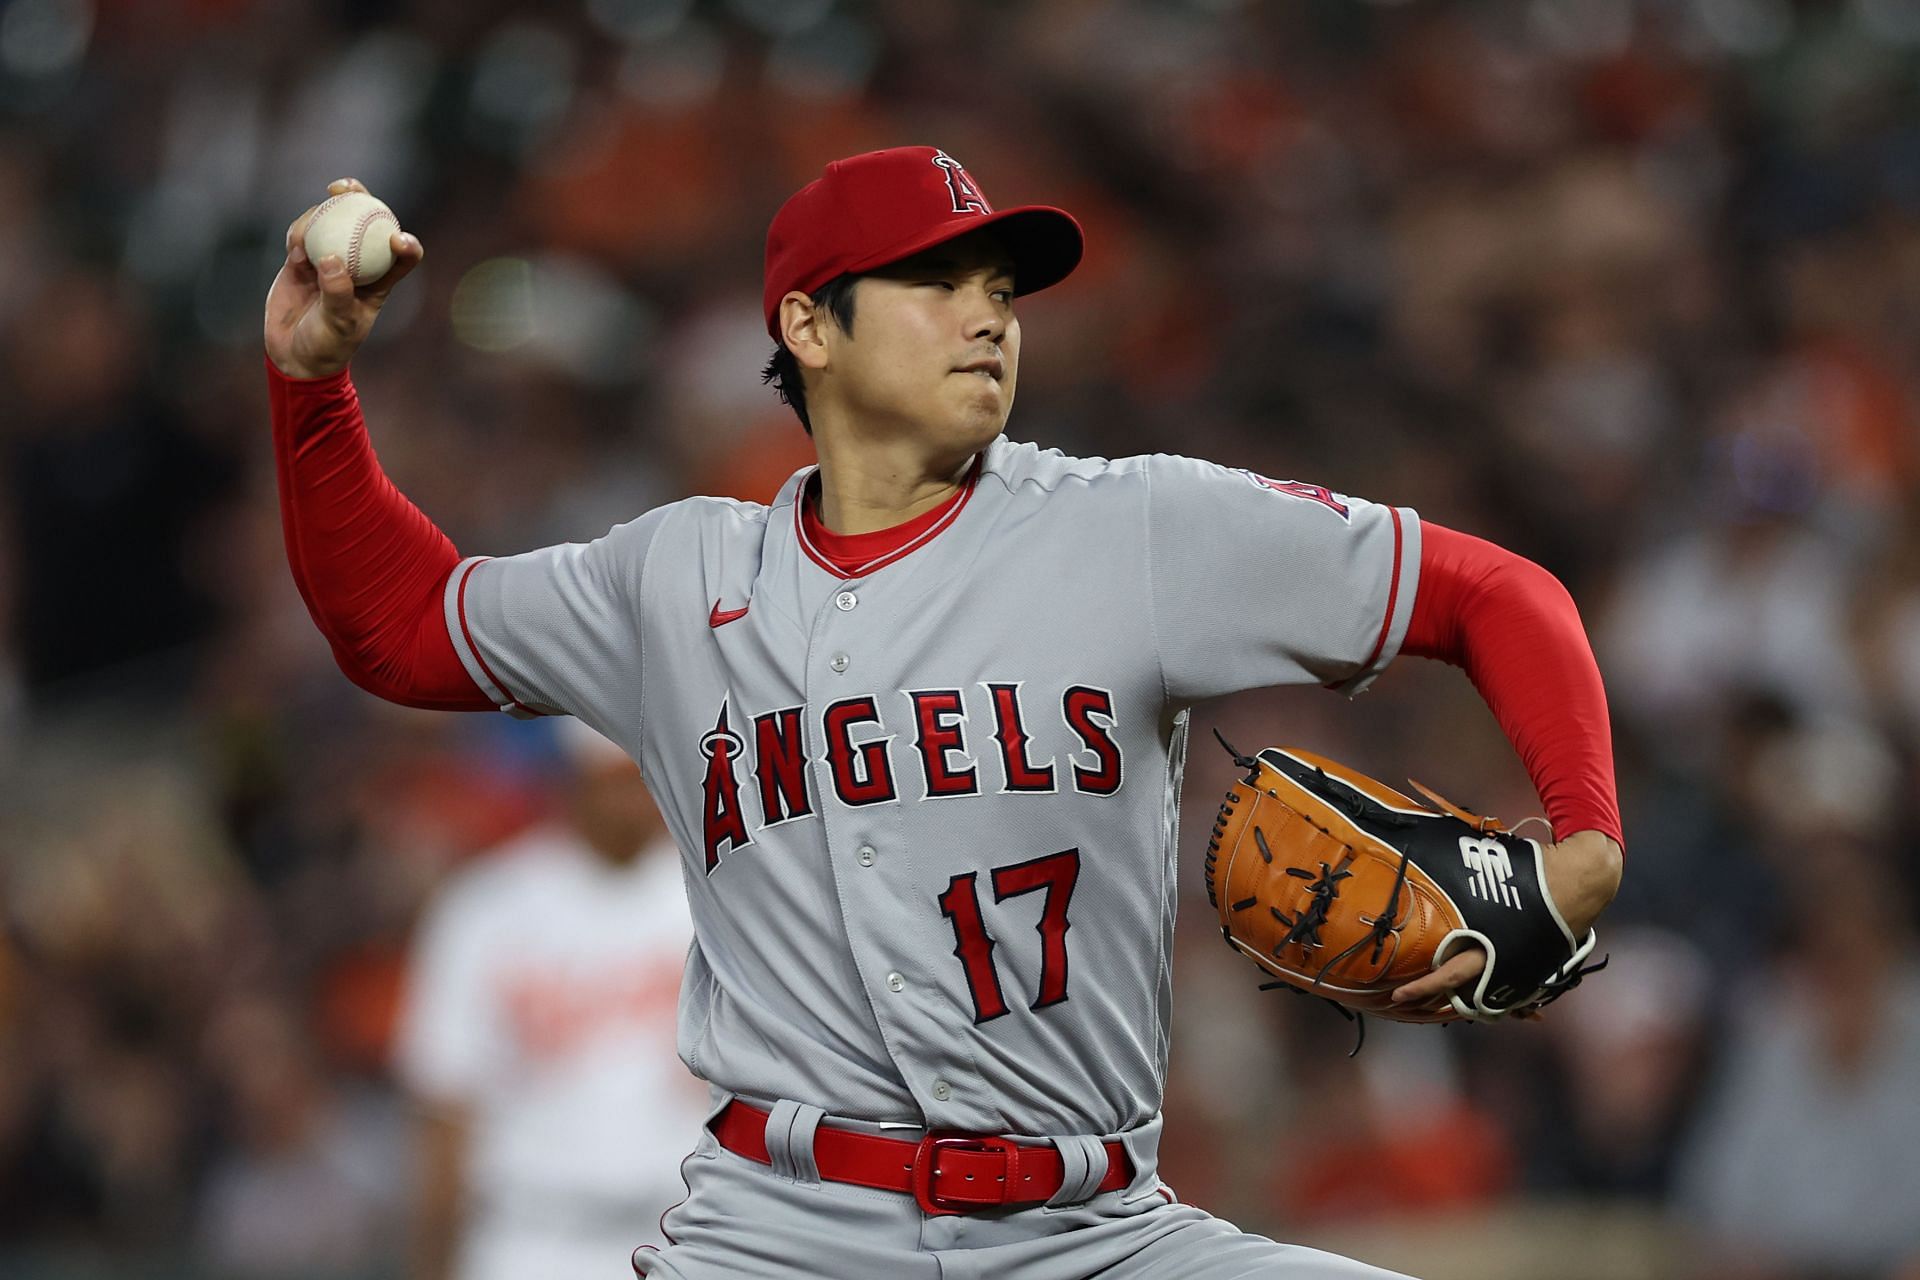 Starting pitcher Shohei Ohtani pitches in the sixth inning against the Baltimore Orioles at Oriole Park at Camden Yards